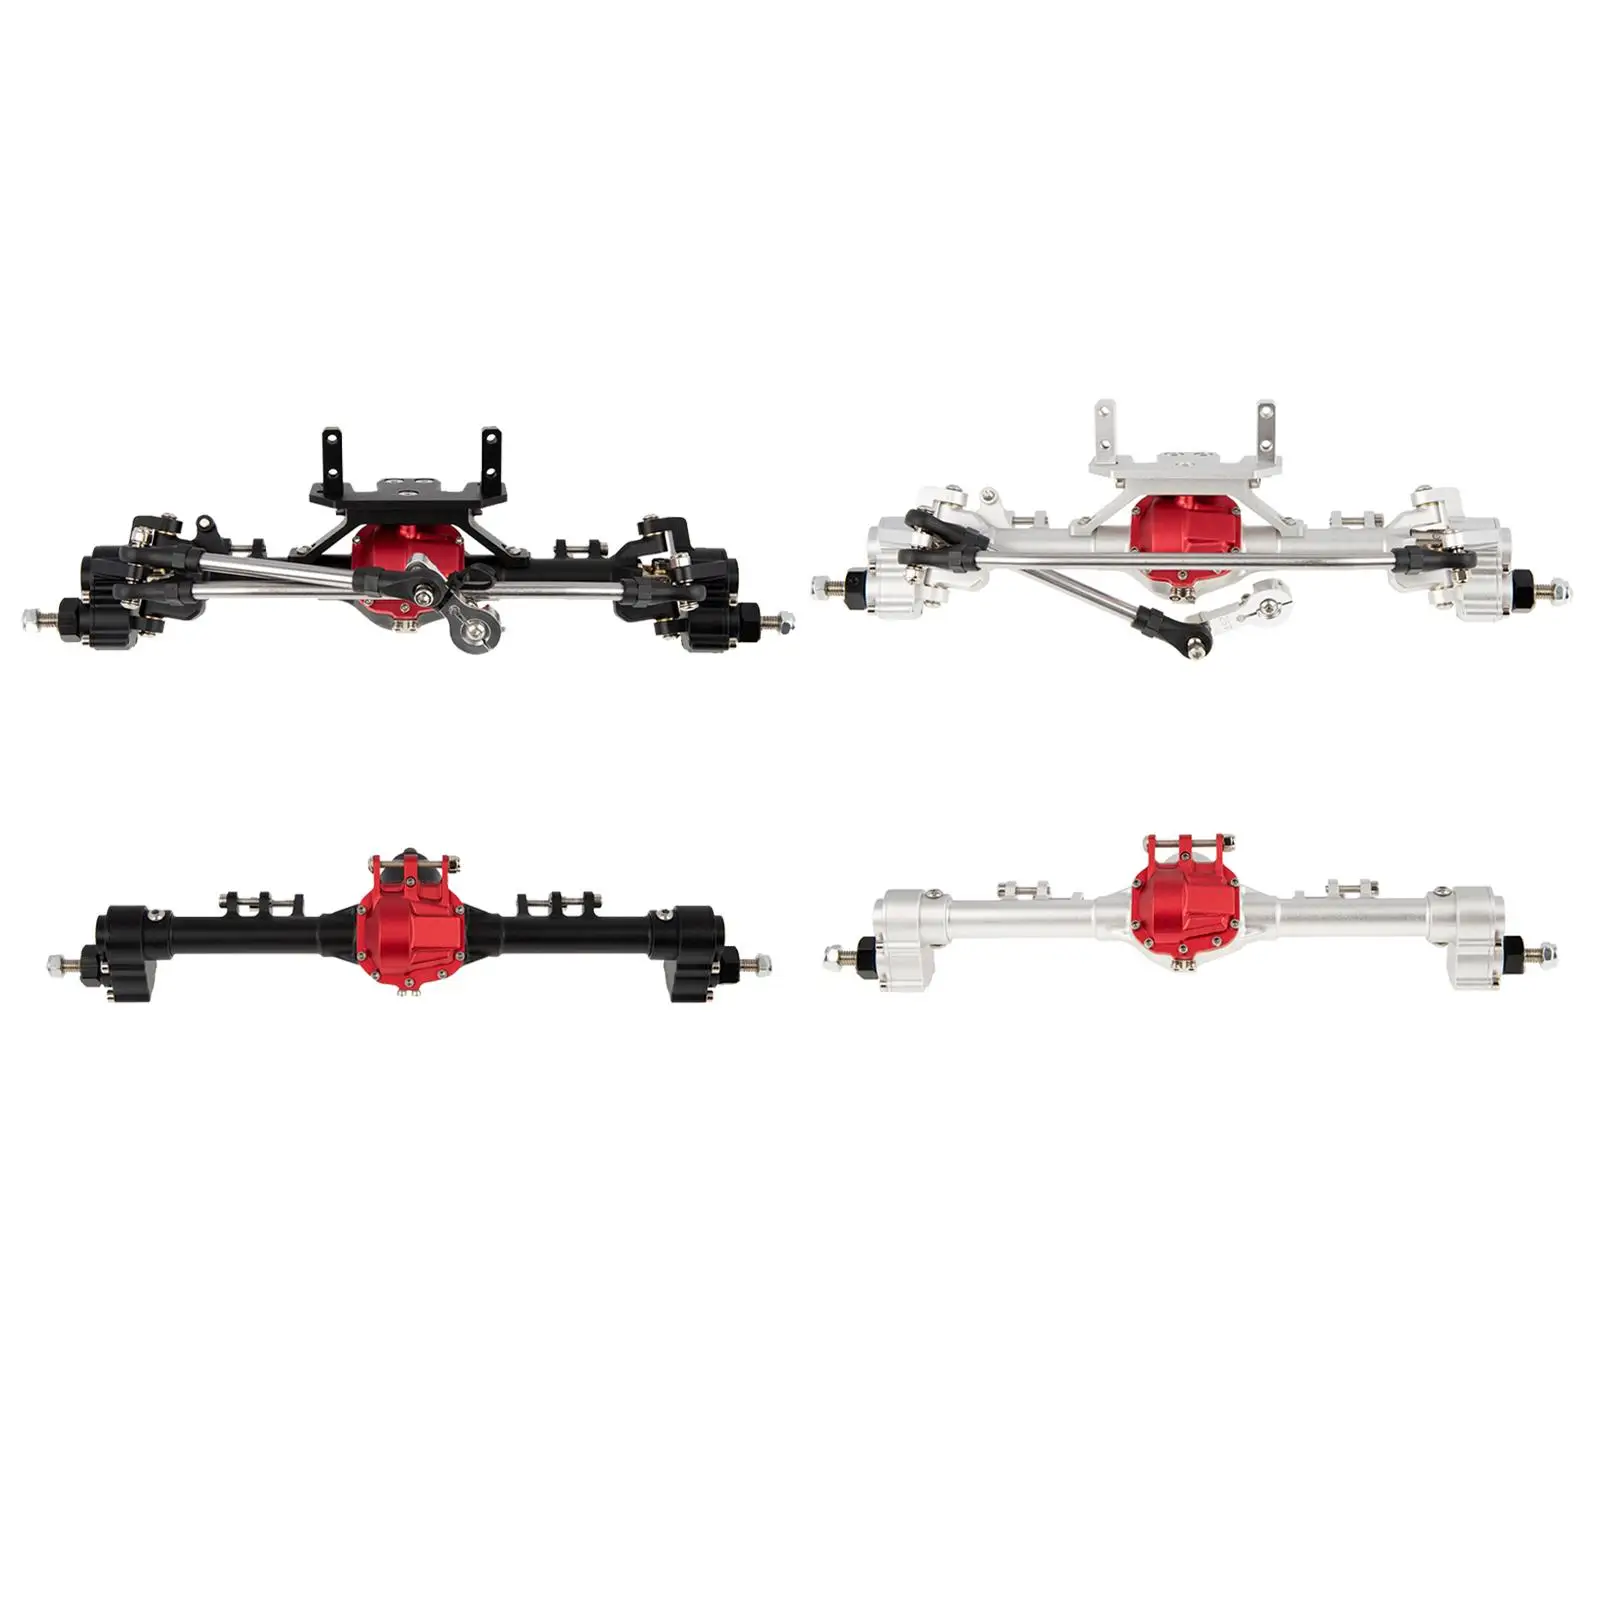 

Aluminum Alloy Front Rear Axle Set 1/10 Scale Replacement Install for Axial SCX10 DIY Model Buggy RC Hobby Car Trucks